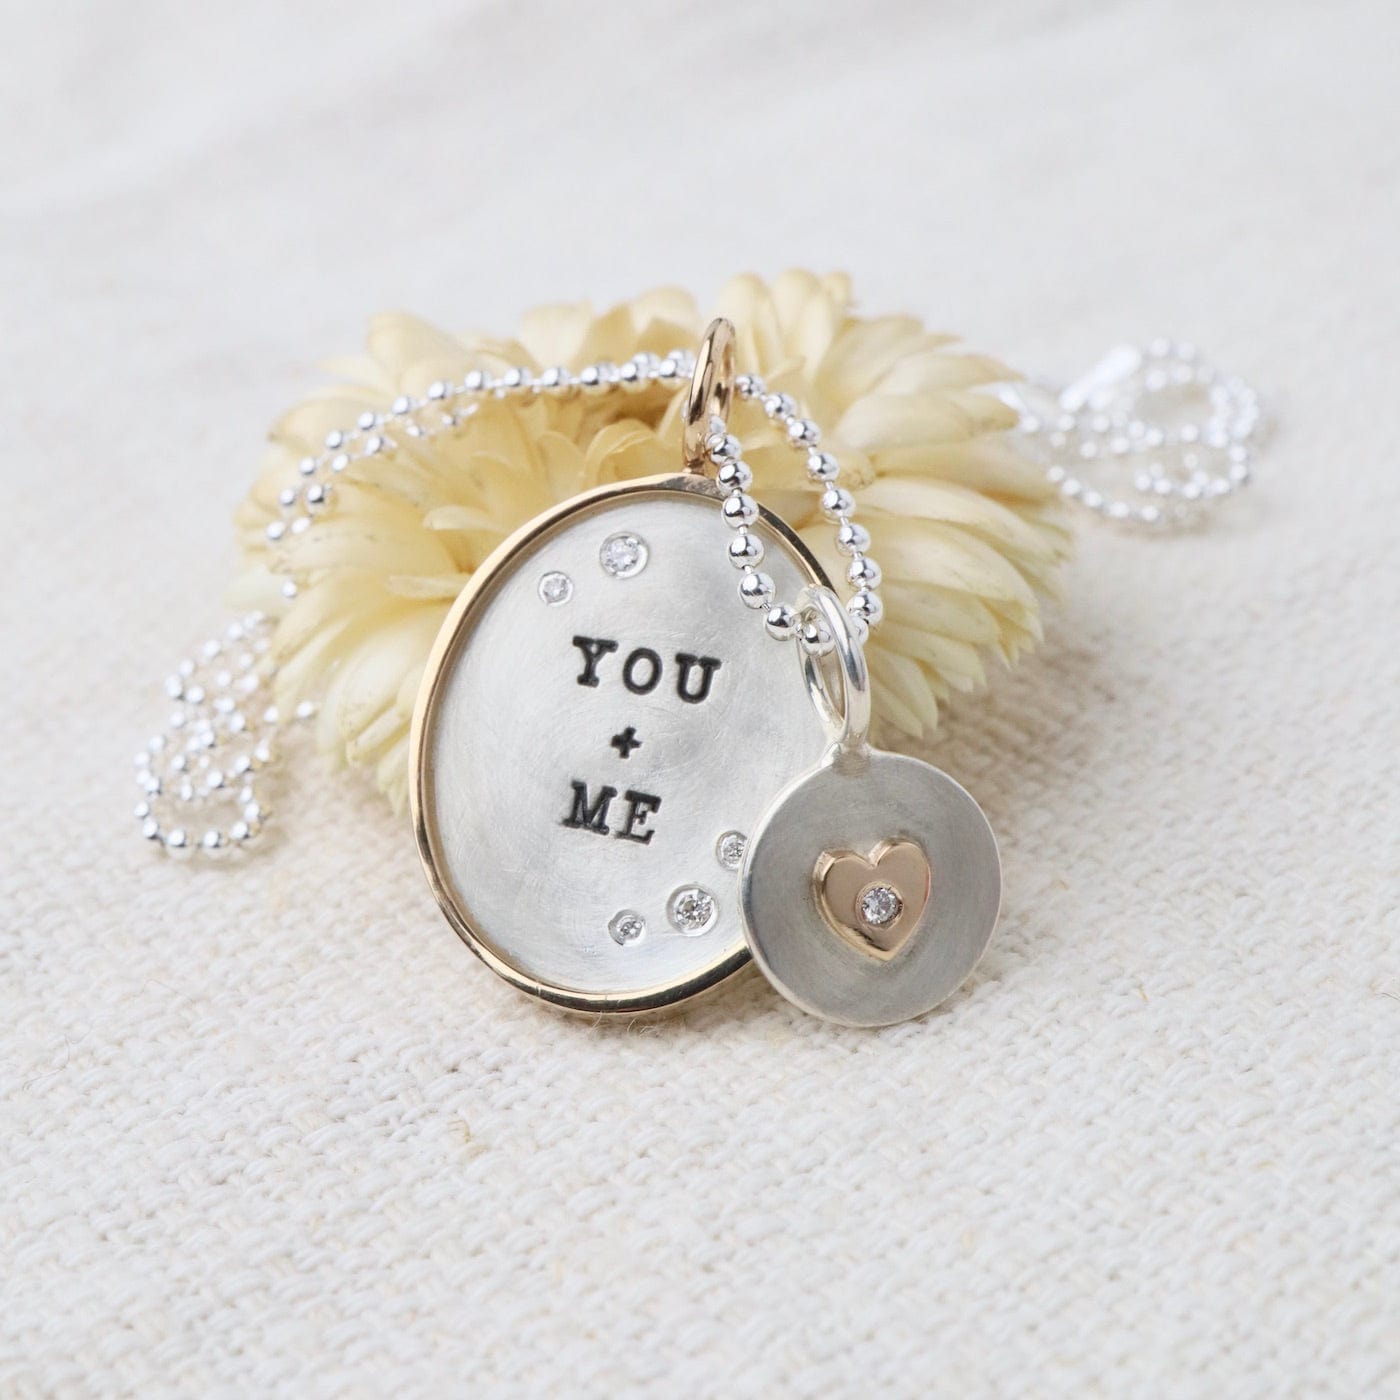 CHM Silver & Gold You + Me Oval Charm